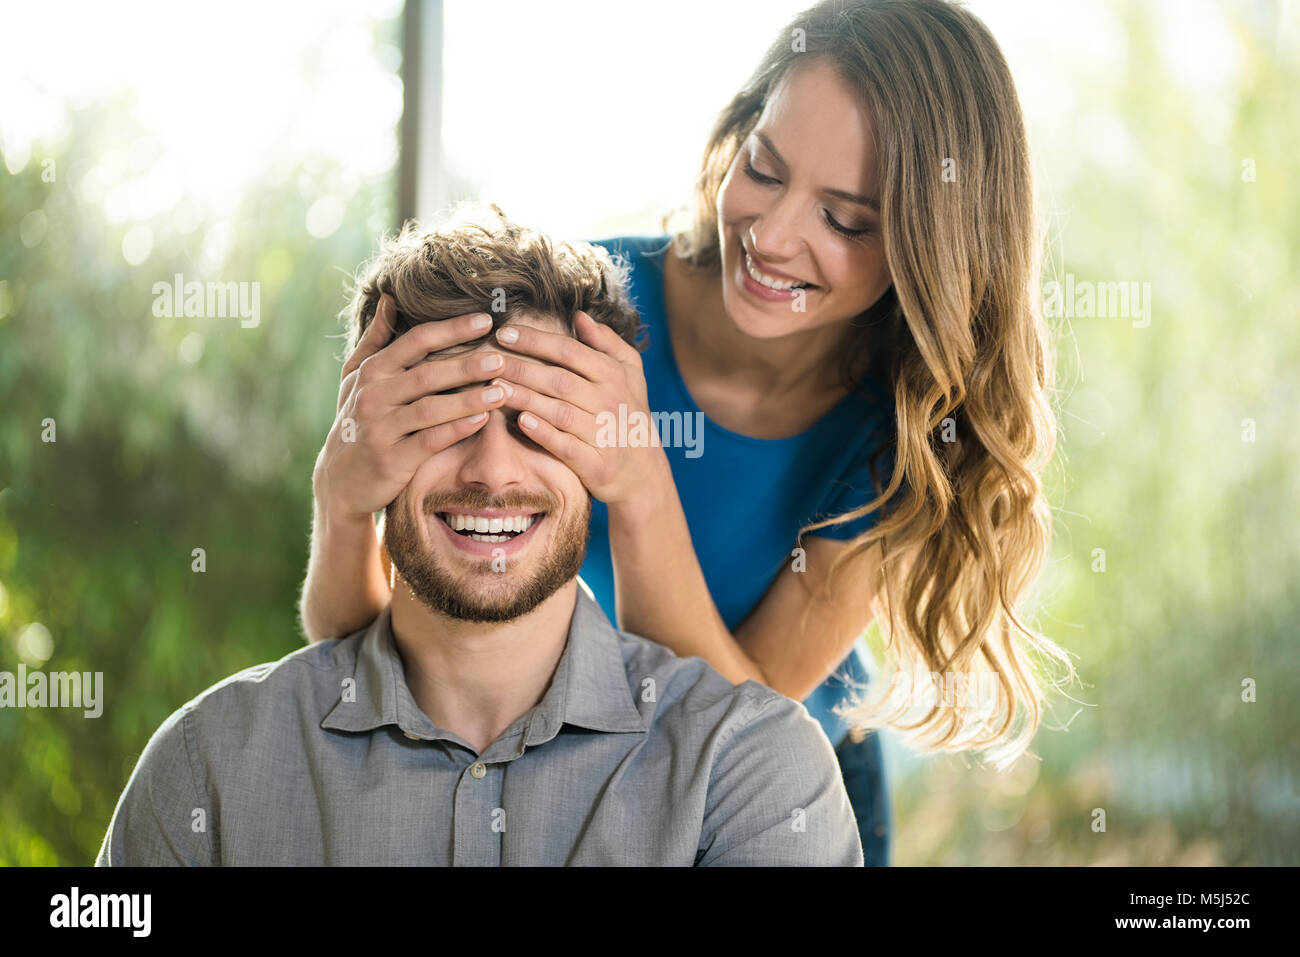 Smiling woman covering her boyfriend's eyes Stock Photo